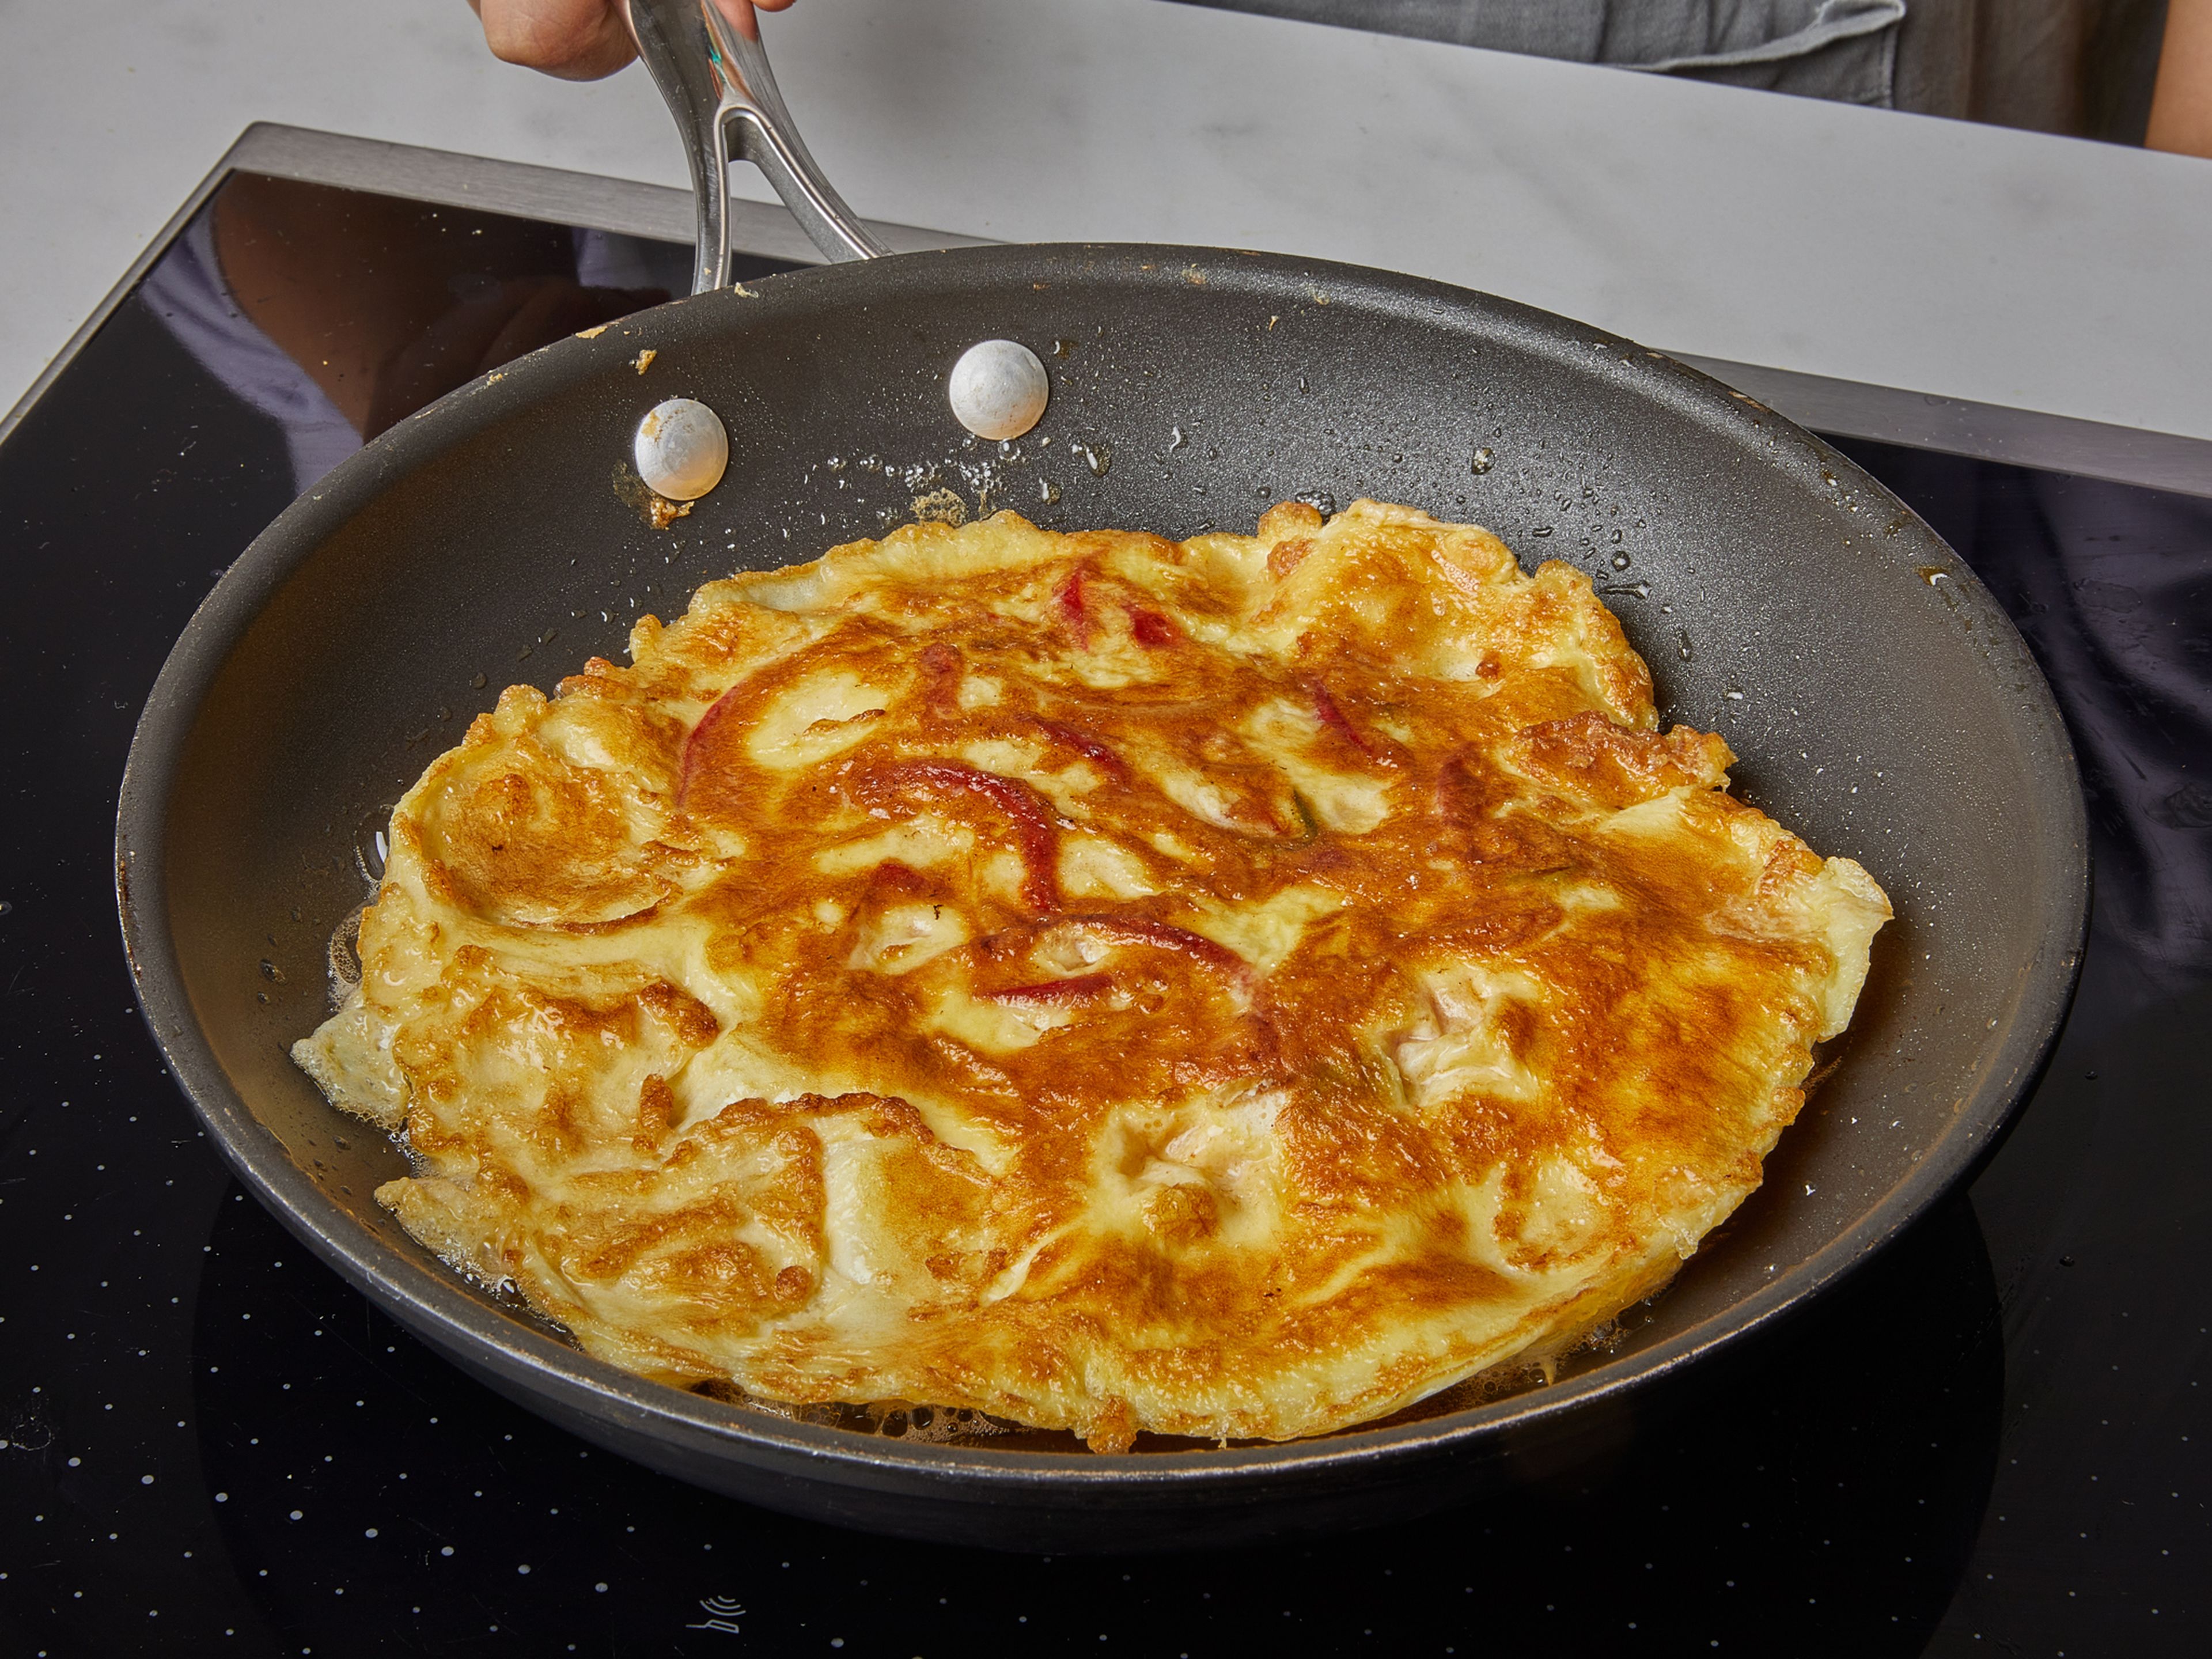 Wipe out the pan and add some vegetable oil. Heat over medium-high heat. When the oil is hot, add half the egg mixture; the edges should puff right when it hits the hot pan. Lower the heat,  and cook until the top of the omelette is set. Then use the help of a spatula to flip, and fry until the other side is golden brown. Remove from the pan and repeat with more and remaining egg mixture.